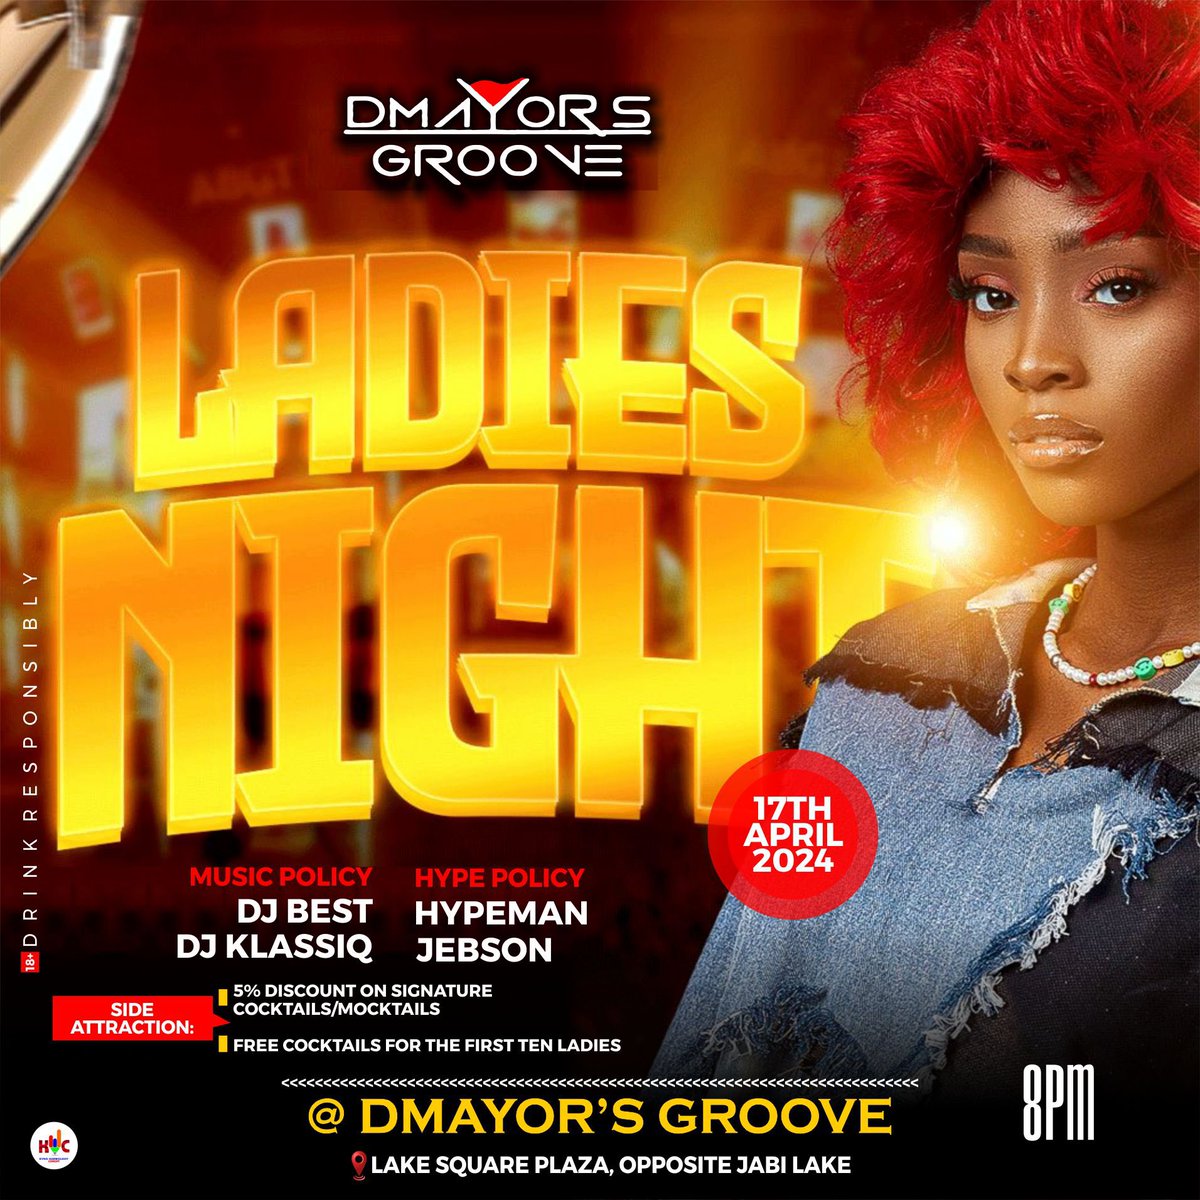 Starting off the week with the ladies 😊😊

Gather your squad and let the good times roll! It's ladies' night, where laughter echoes, memories are made, and friendships sparkle under the stars. Cheers to an unforgettable soirée!

#DMayorgroove #LadiesNight #AbujaTwitterCommunity